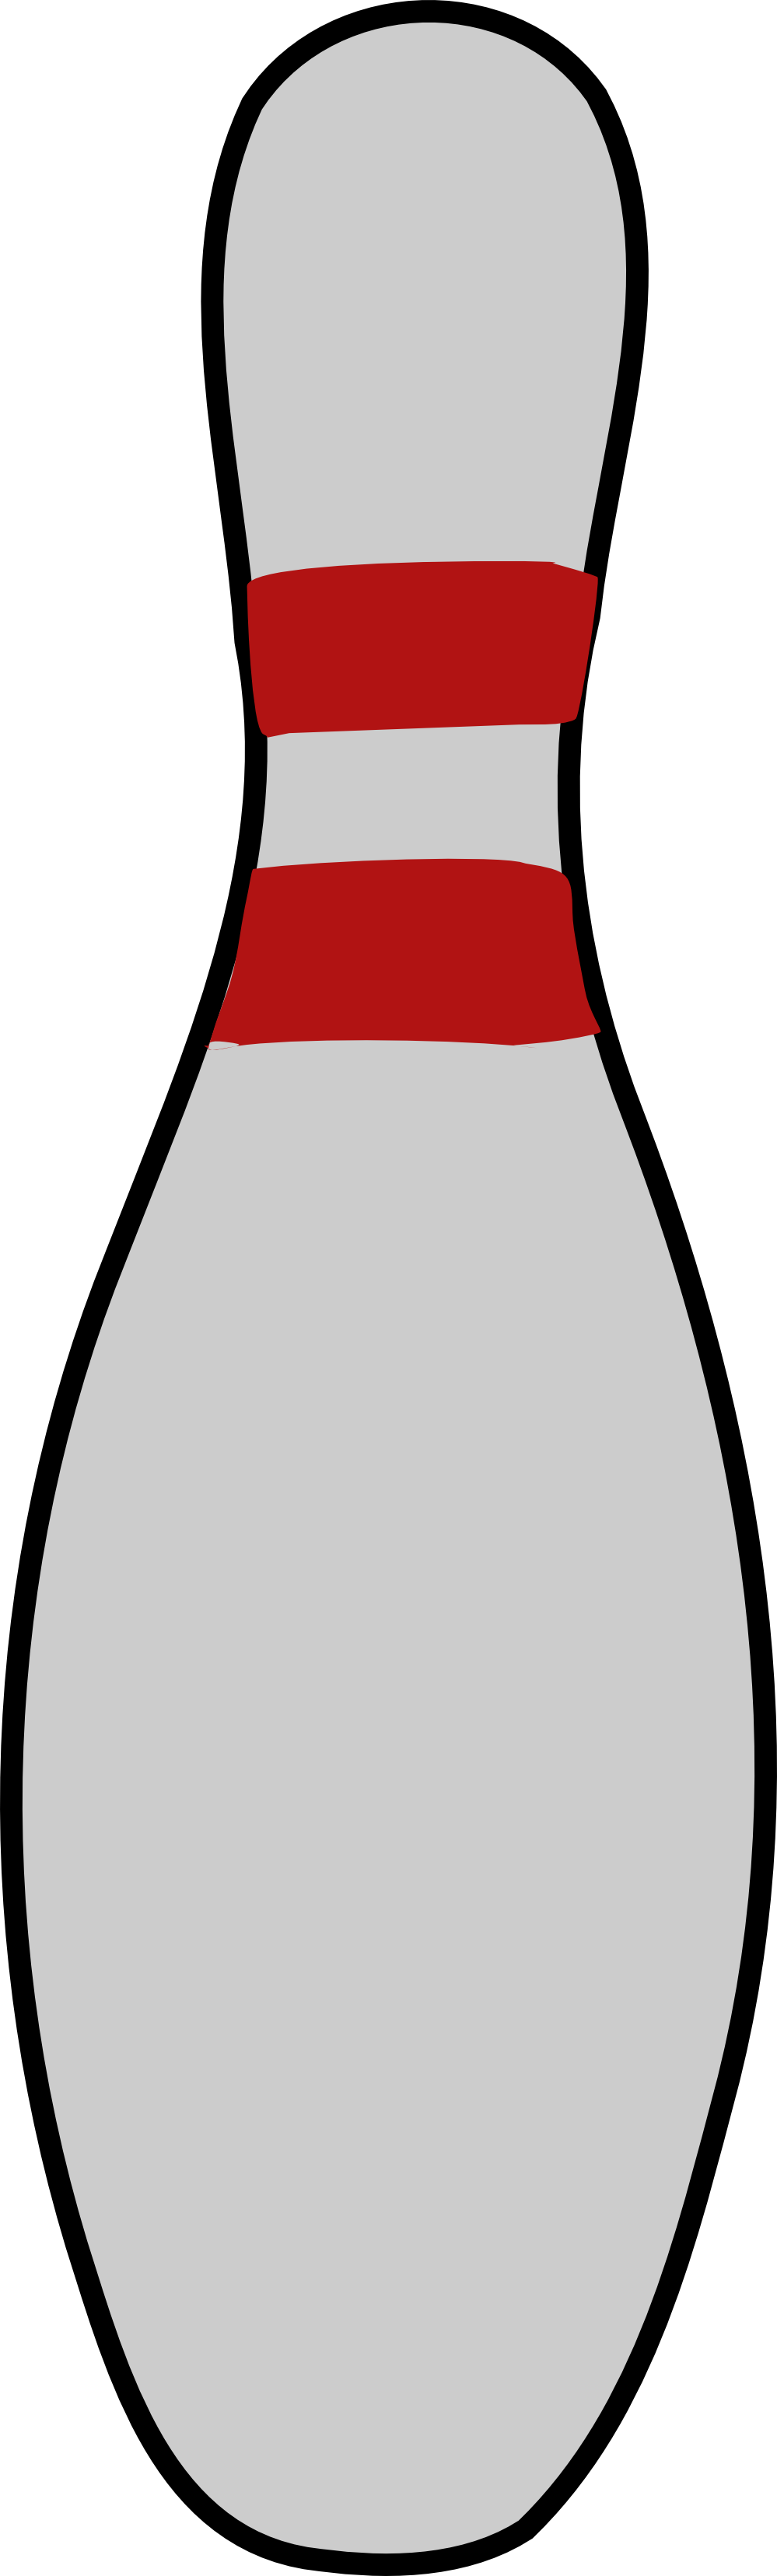 Bowling Pins Picture   Free Cliparts That You Can Download To You